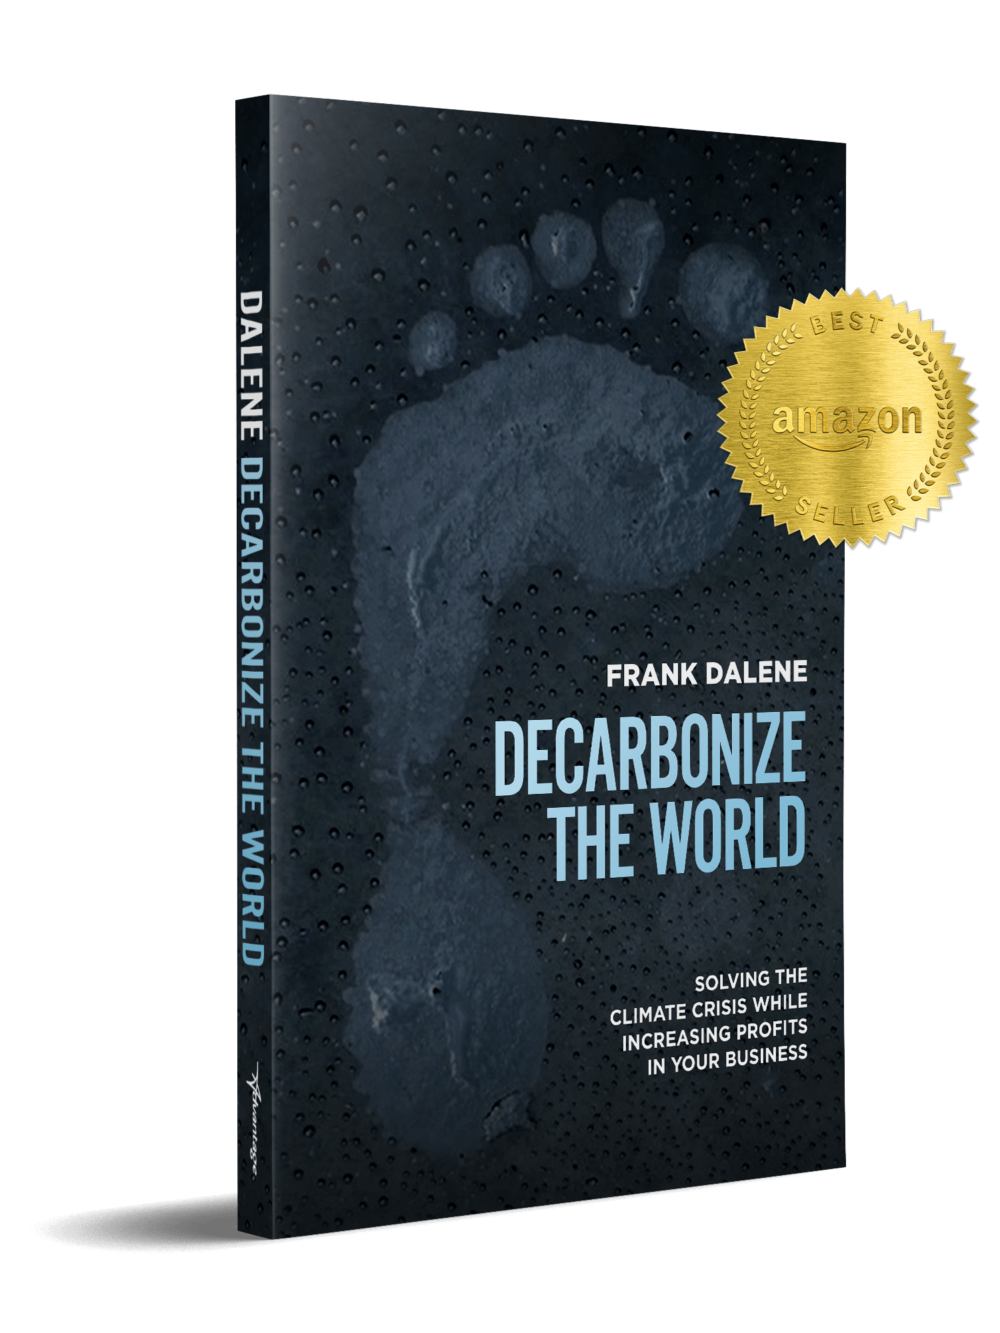 Frank Dalene - Decarbonize the World (Amazon Best Seller)- book cover